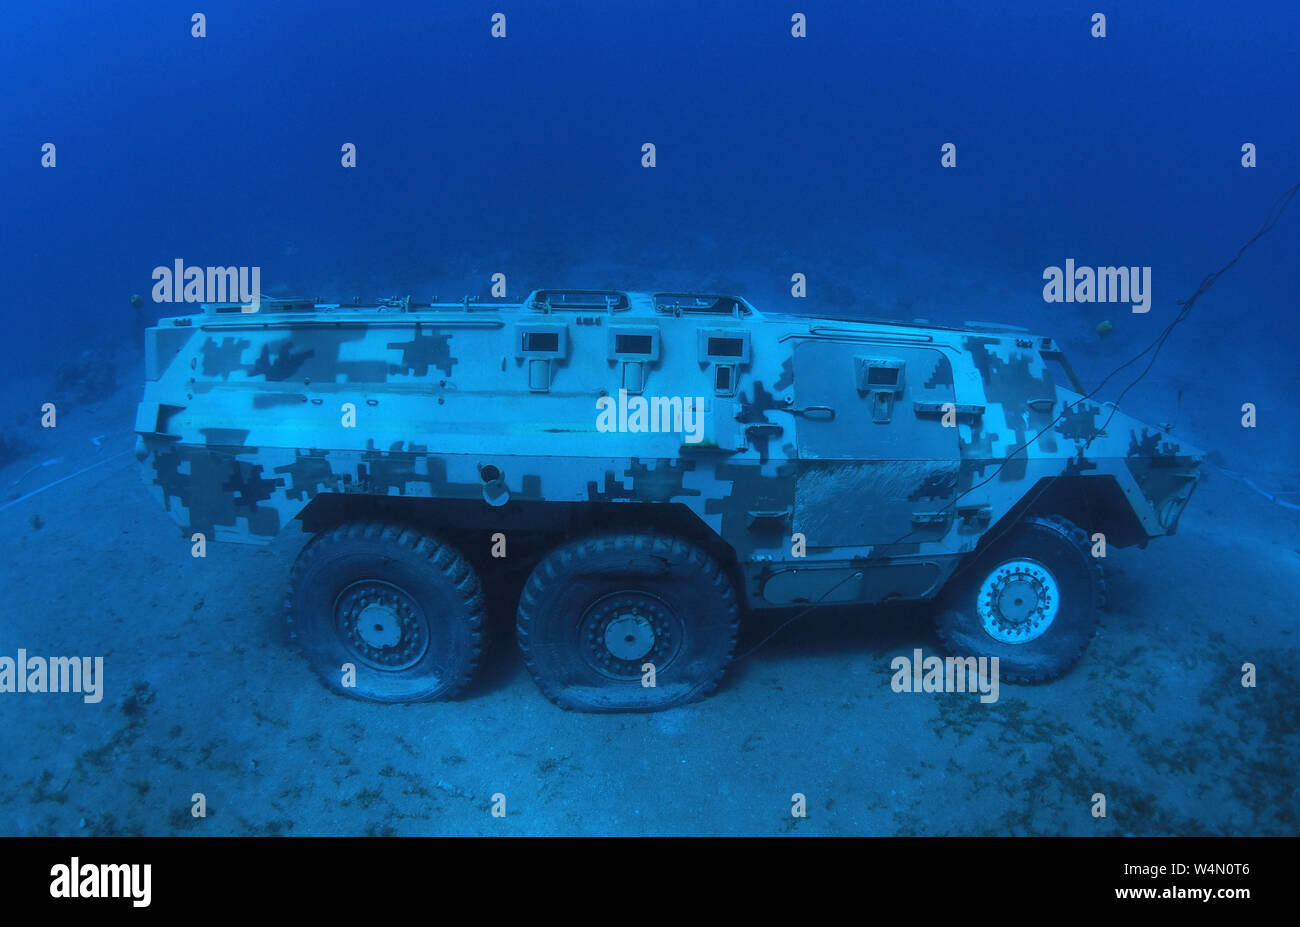 (190724) -- AMMAN, July 24, 2019 (Xinhua) -- Handout photo obtained on July 23, 2019 shows a Jordanian Armed Forces armoured vehicle lying on the seabed of the Red Sea as part of a new underwater military museum off the coast of the southern port city of Aqaba, Jordan. The museum is built by Aqaba Special Economic Zone to attract more tourists in summer, (Aqaba Special Economic Zone/Handout via Xinhua) Stock Photo